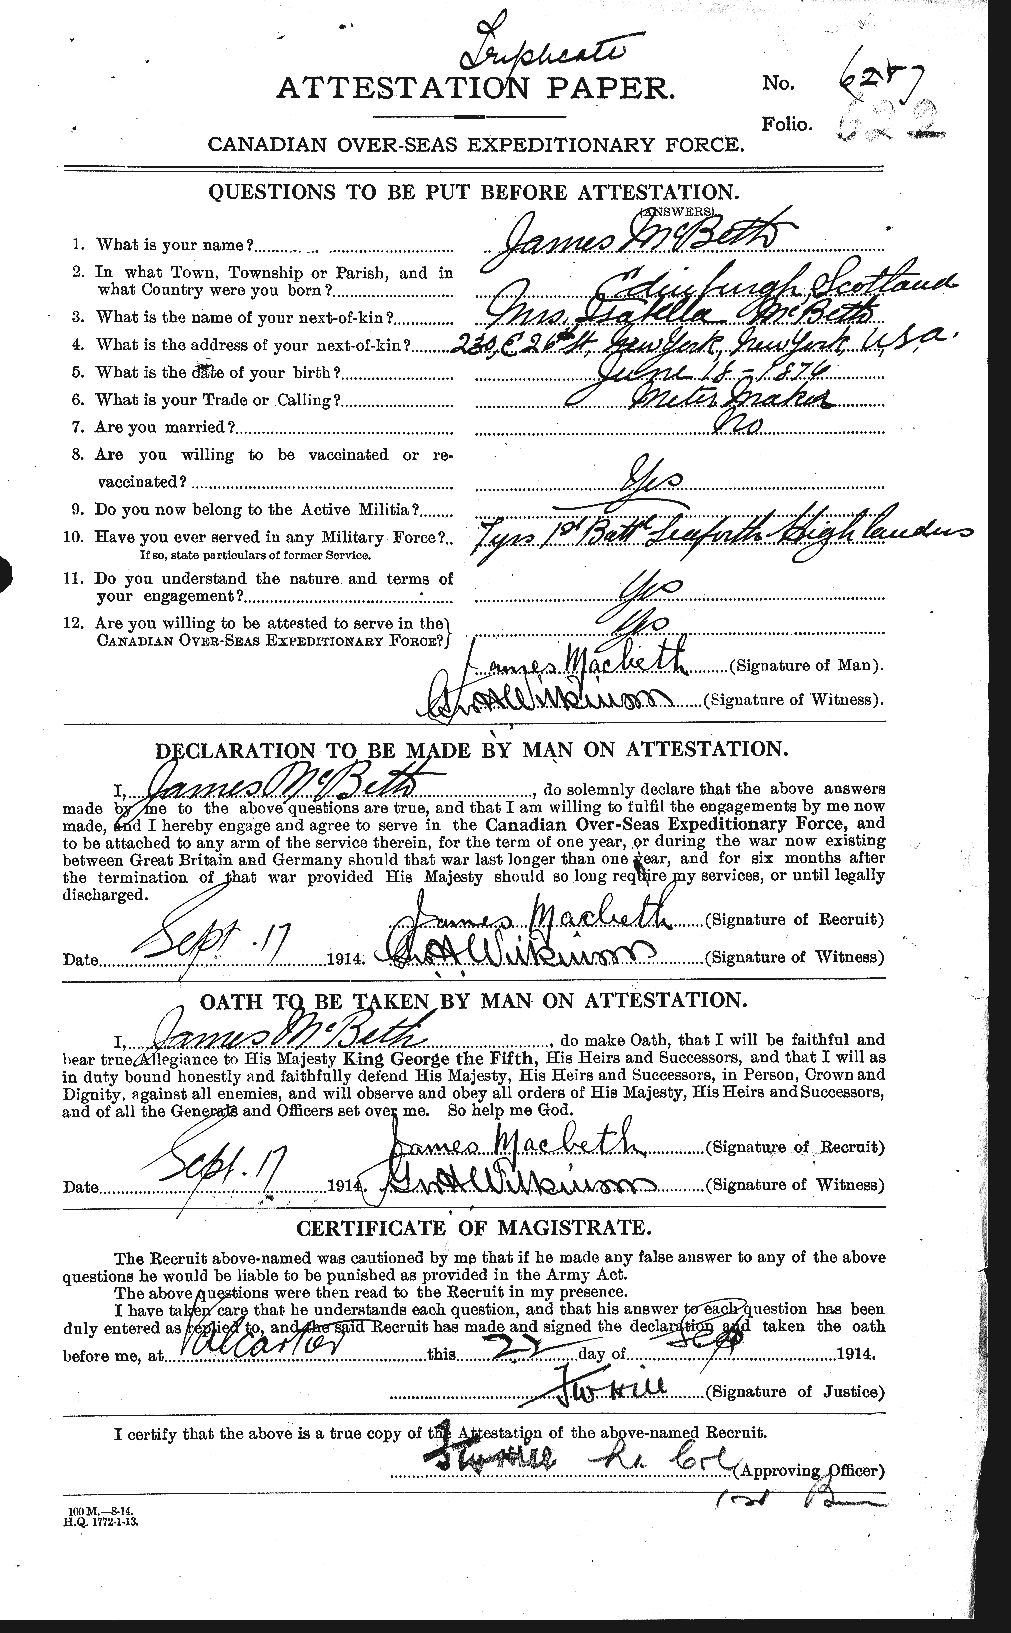 Personnel Records of the First World War - CEF 132116a